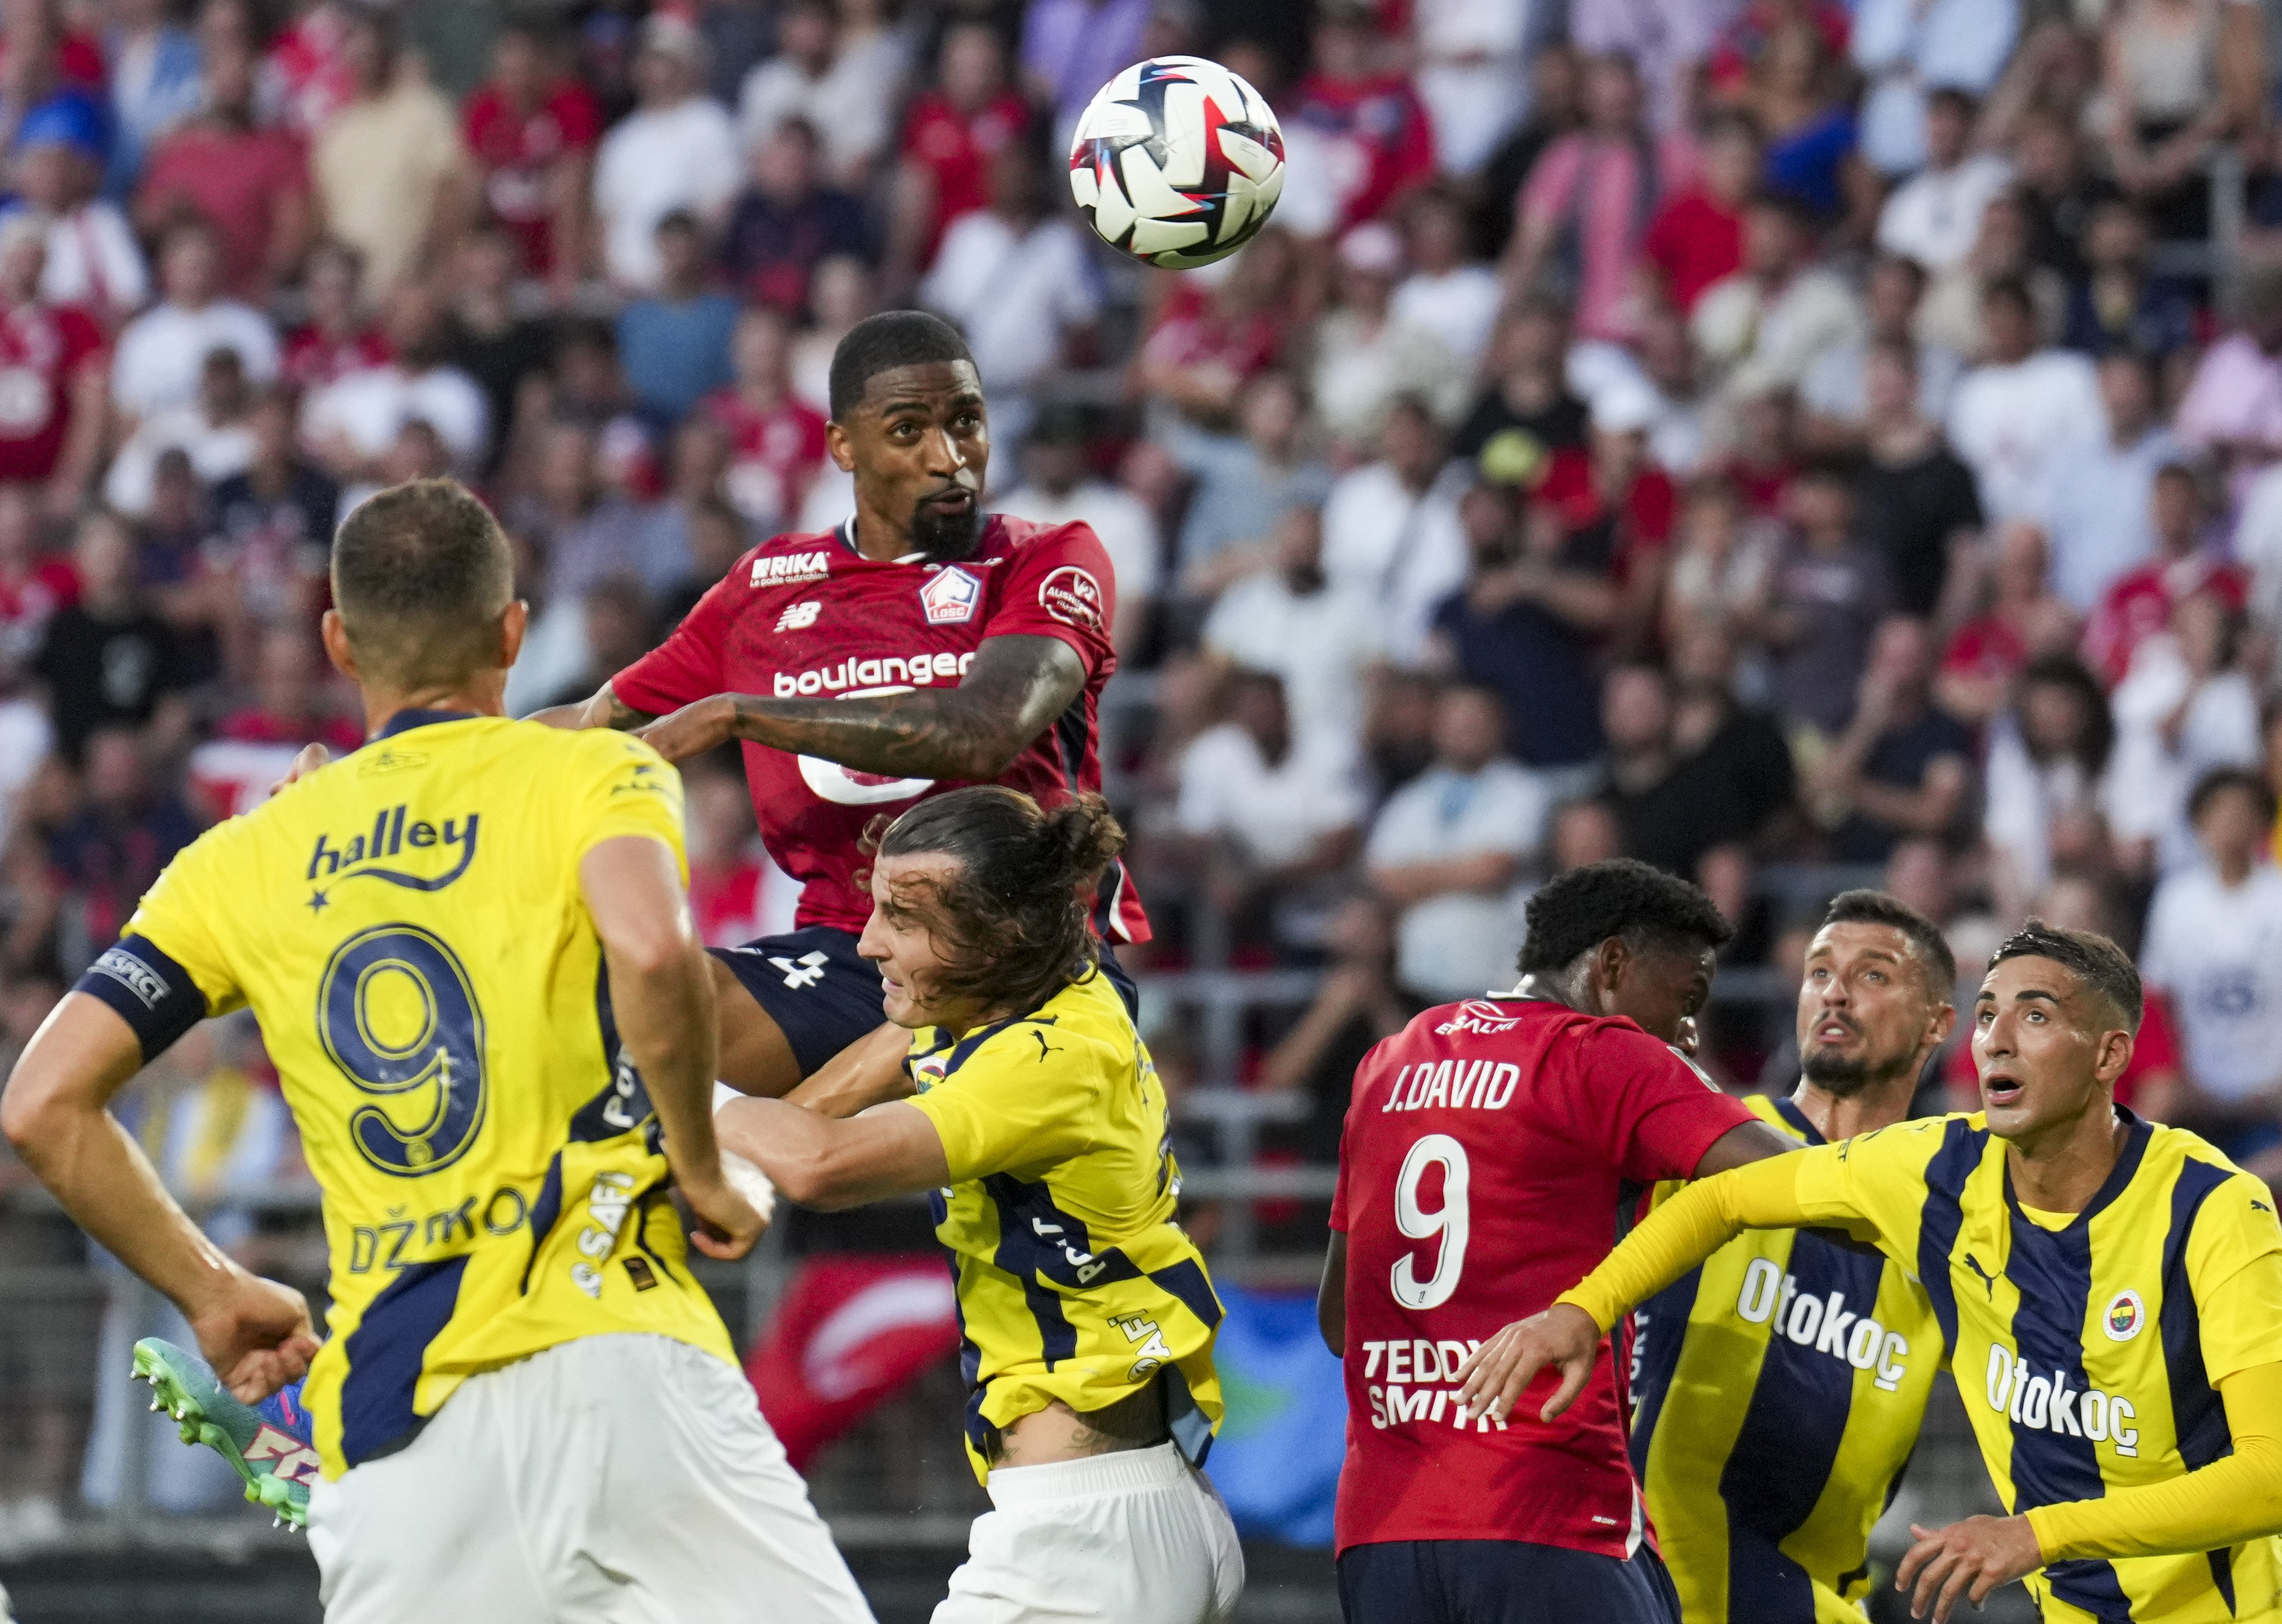 aa-20240806-35335066-35335063-lille-v-fenerbahce-ucl-001.jpg